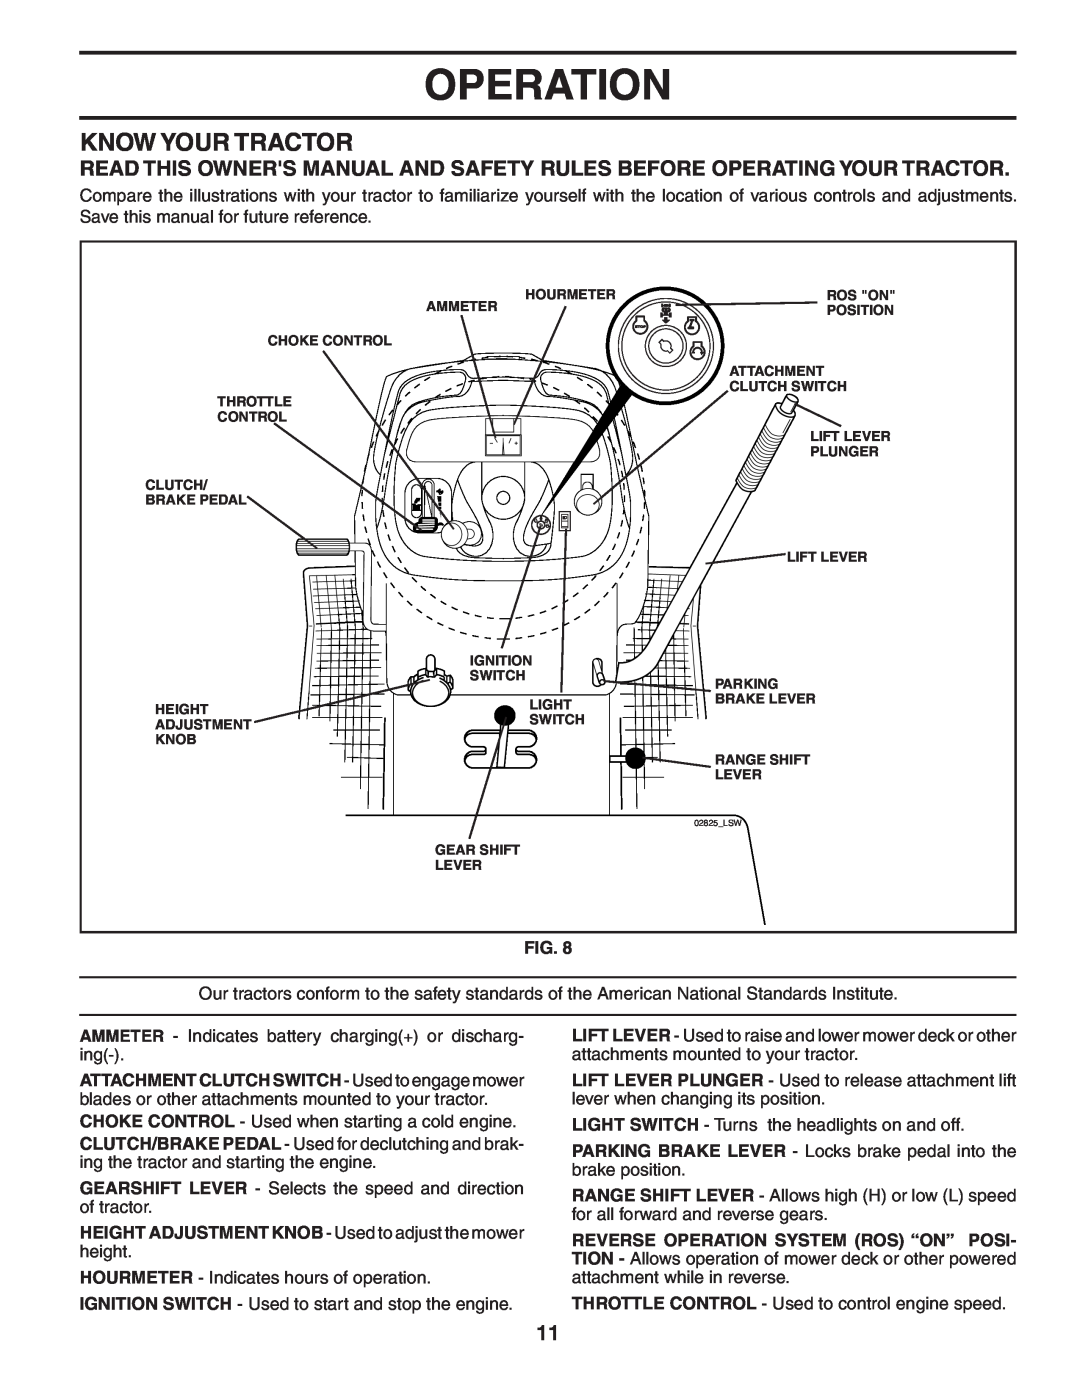 Poulan 194604 manual Know Your Tractor, Operation, HEIGHT ADJUSTMENT KNOB - Used to adjust the mower height 